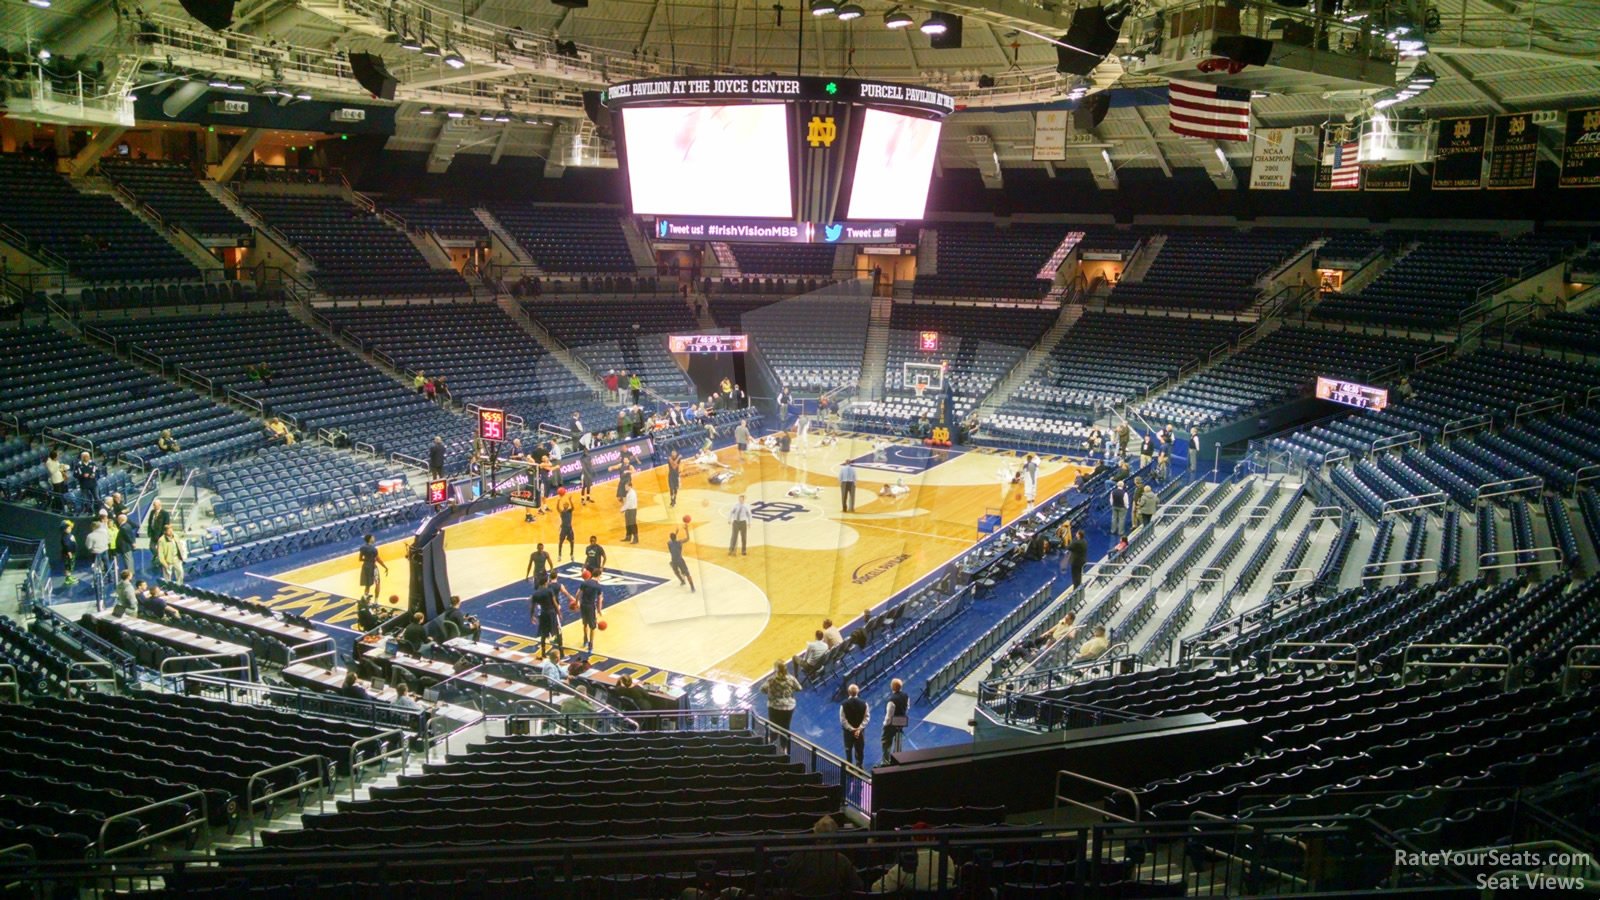 section 113, row 10 seat view  - joyce center